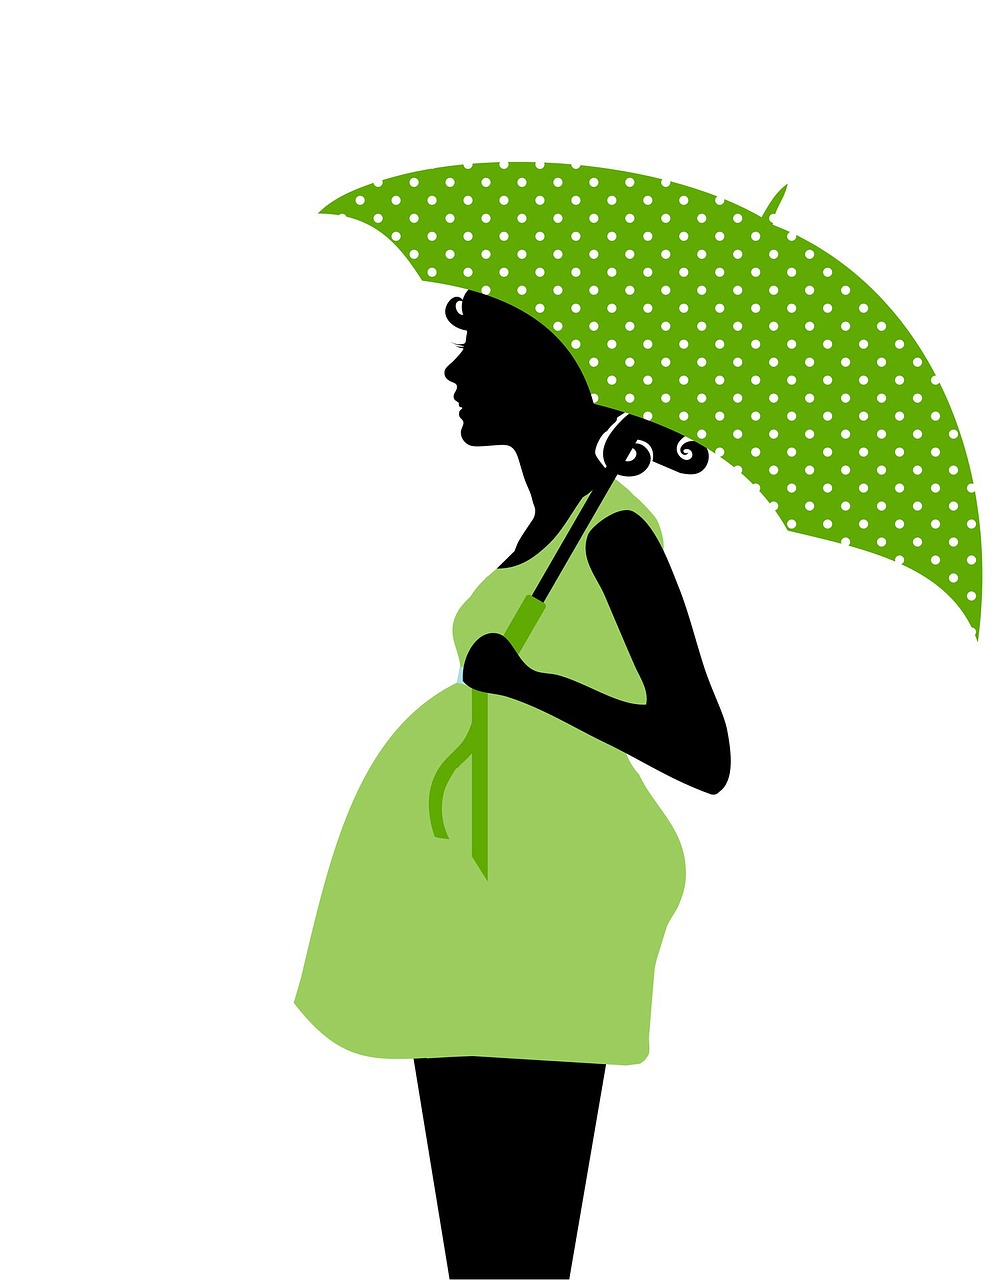 Wearables as a pregnancy aid?